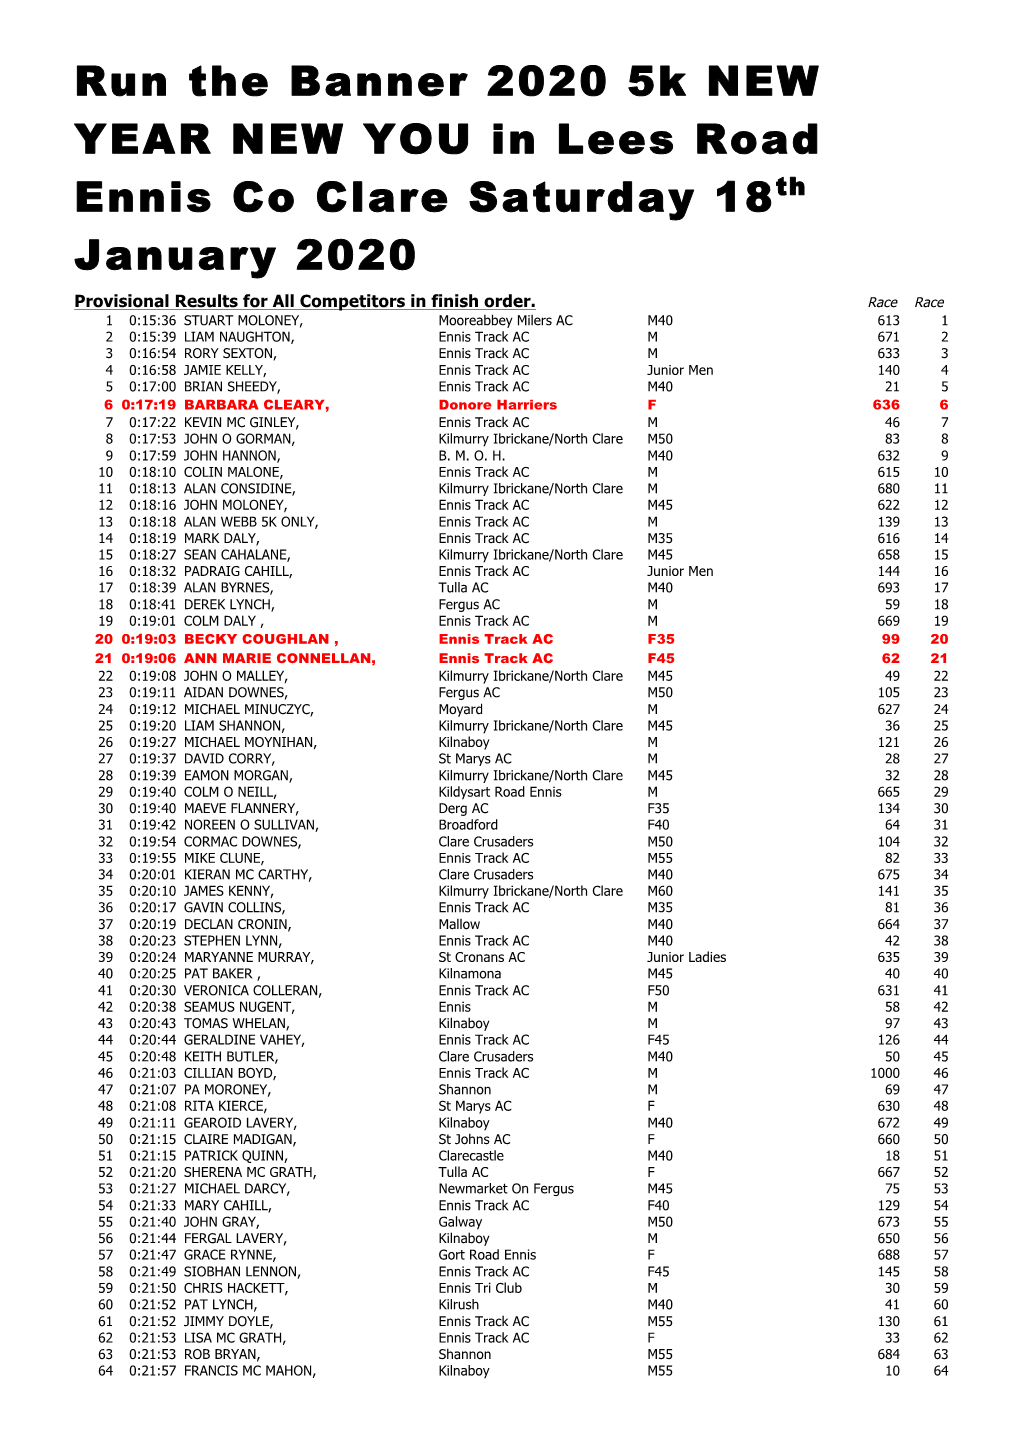 Run the Banner 2020 5K NEW YEAR NEW YOU in Lees Road Ennis Co Clare Saturday 18Th January 2020 Provisional Results for All Competitors in Finish Order